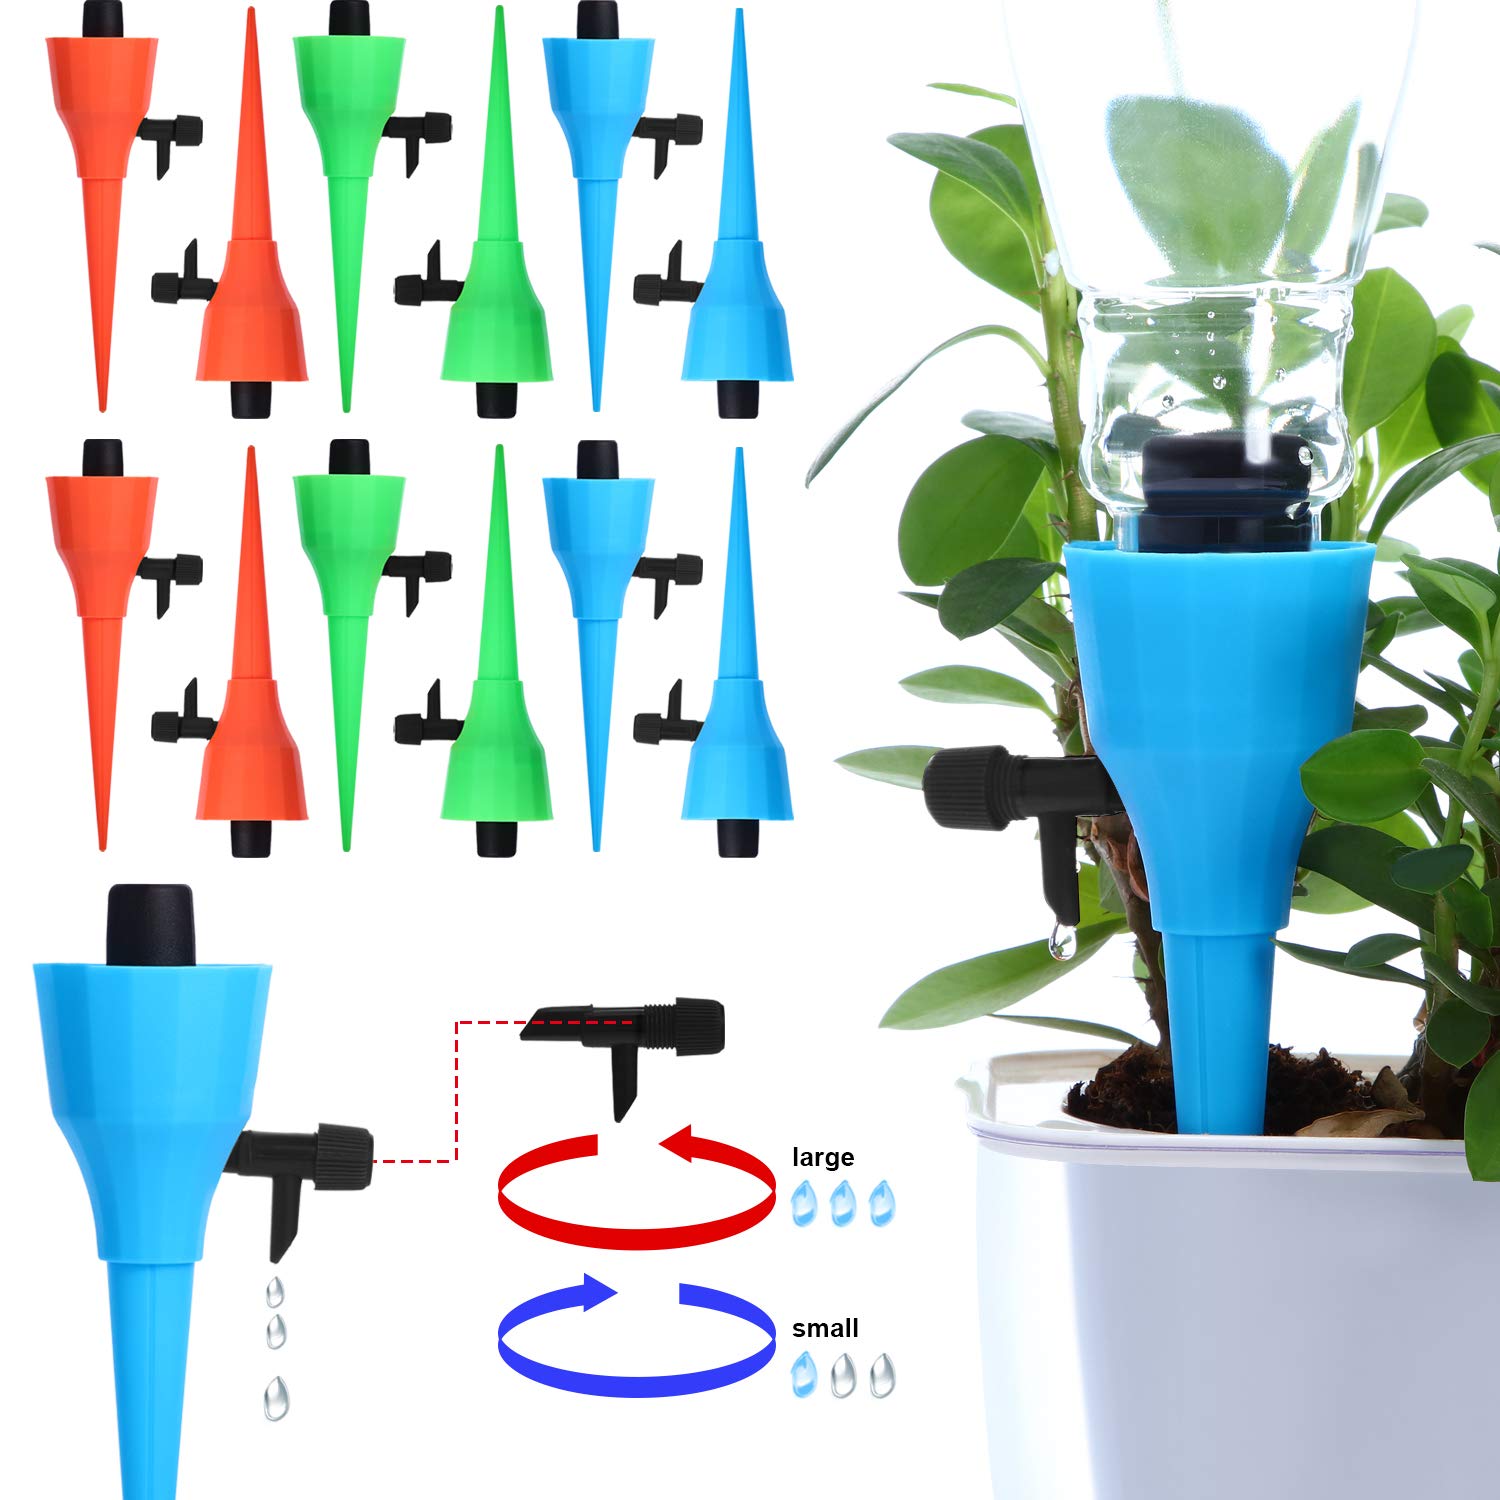 

6Pcs/12Pcs New Upgrade Thickened Self Automatic Sprayer Watering Device Adjustable Water Flow Dripper Spikes With Control Valve Constant Pressure Design Drip Irrigation Kit Fit On All Bottles